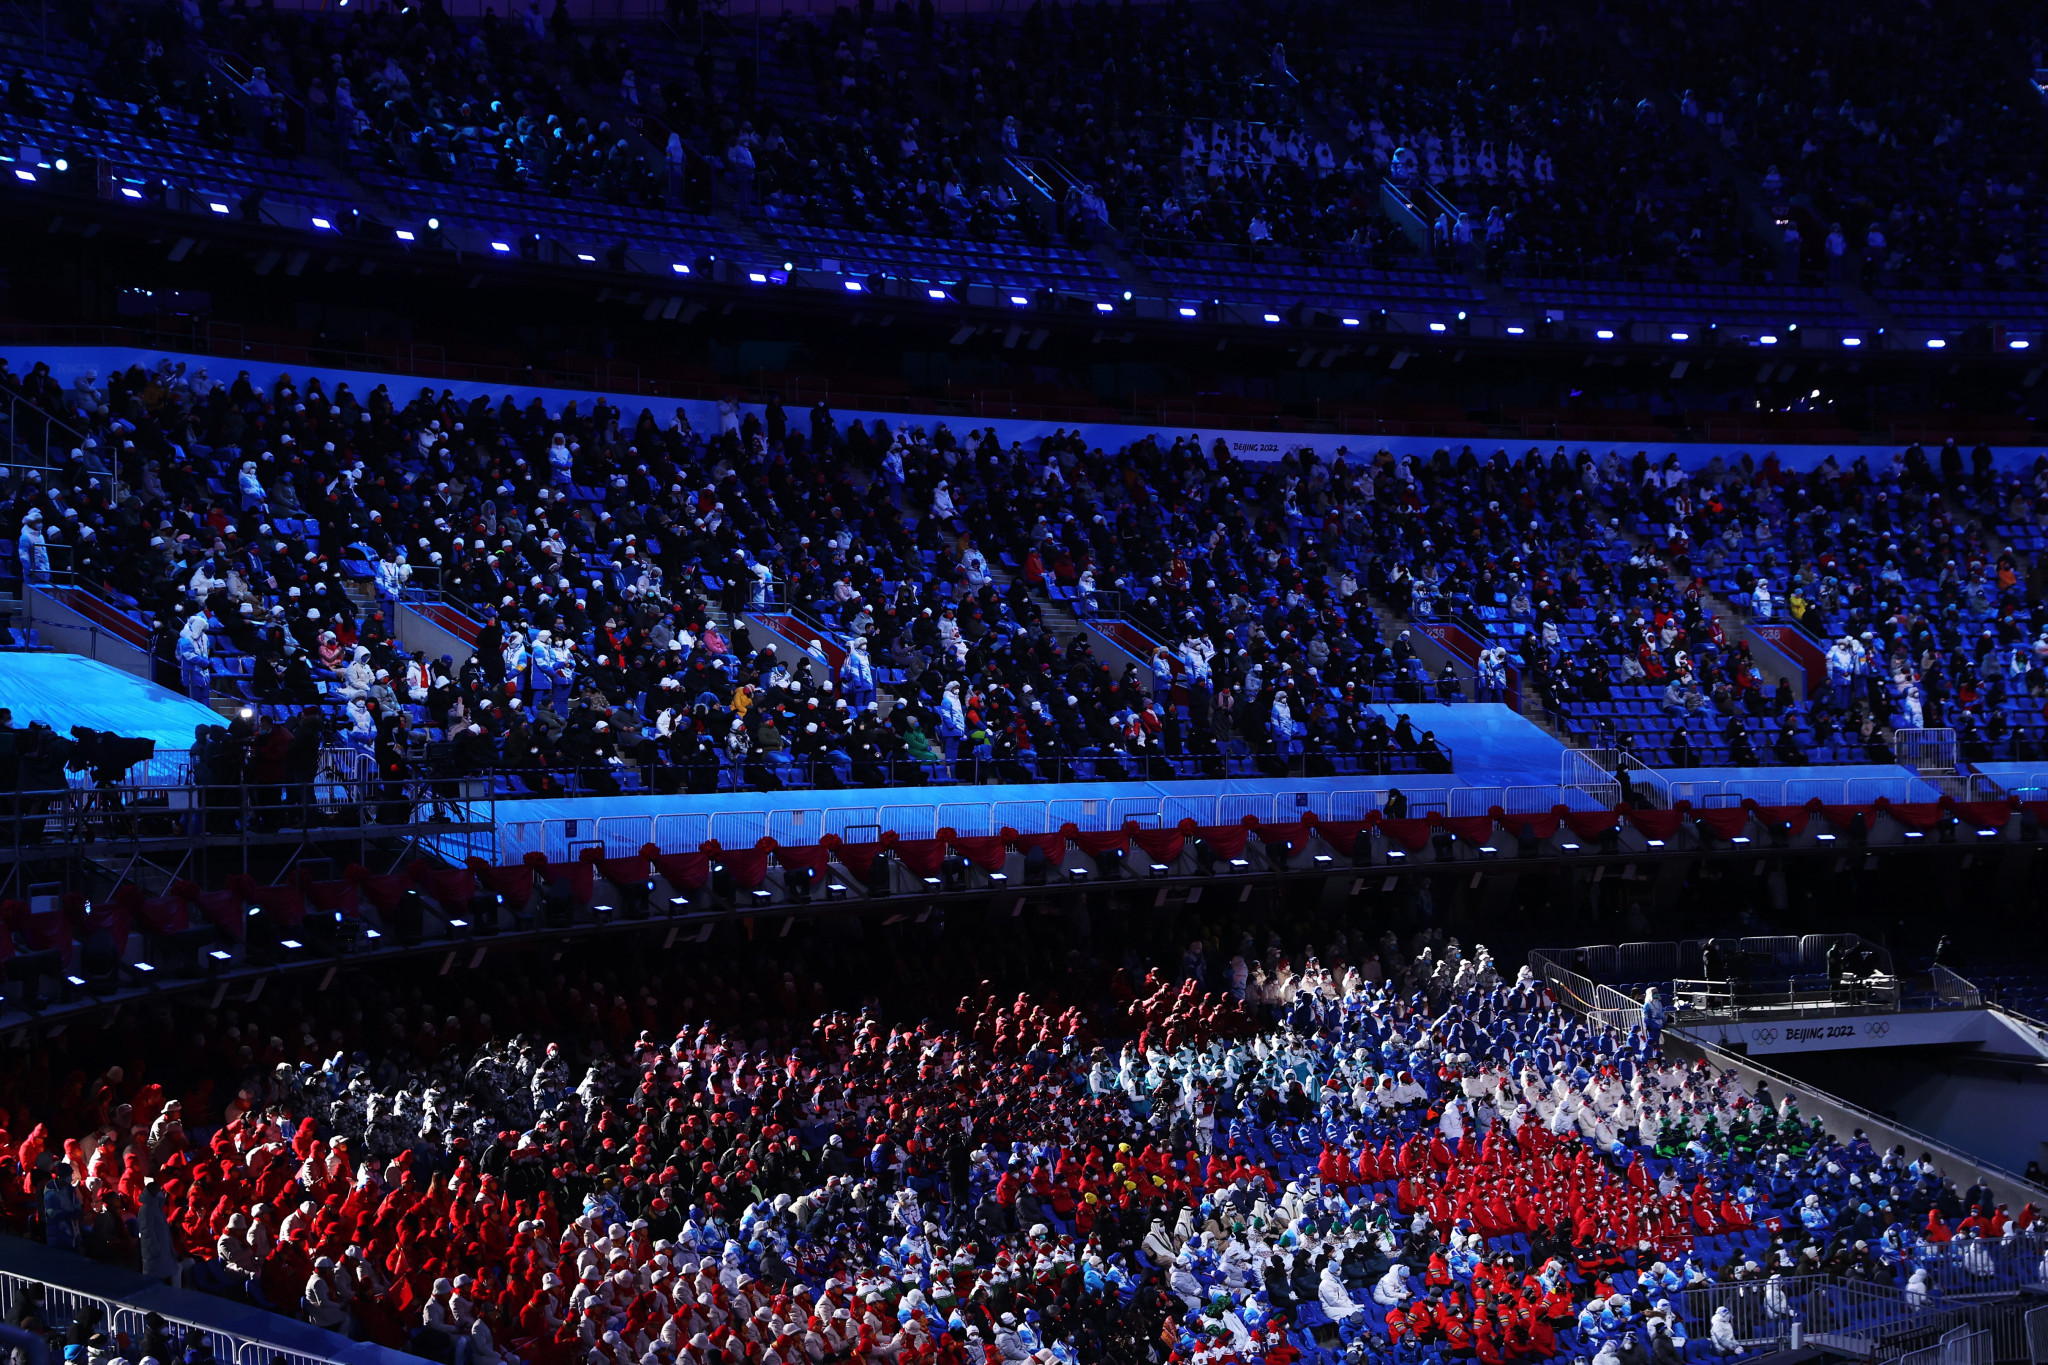 Around 1,500 spectators were inside the Beijing National Stadium to see the Opening Ceremony of the Winter Olympics ©Getty Images